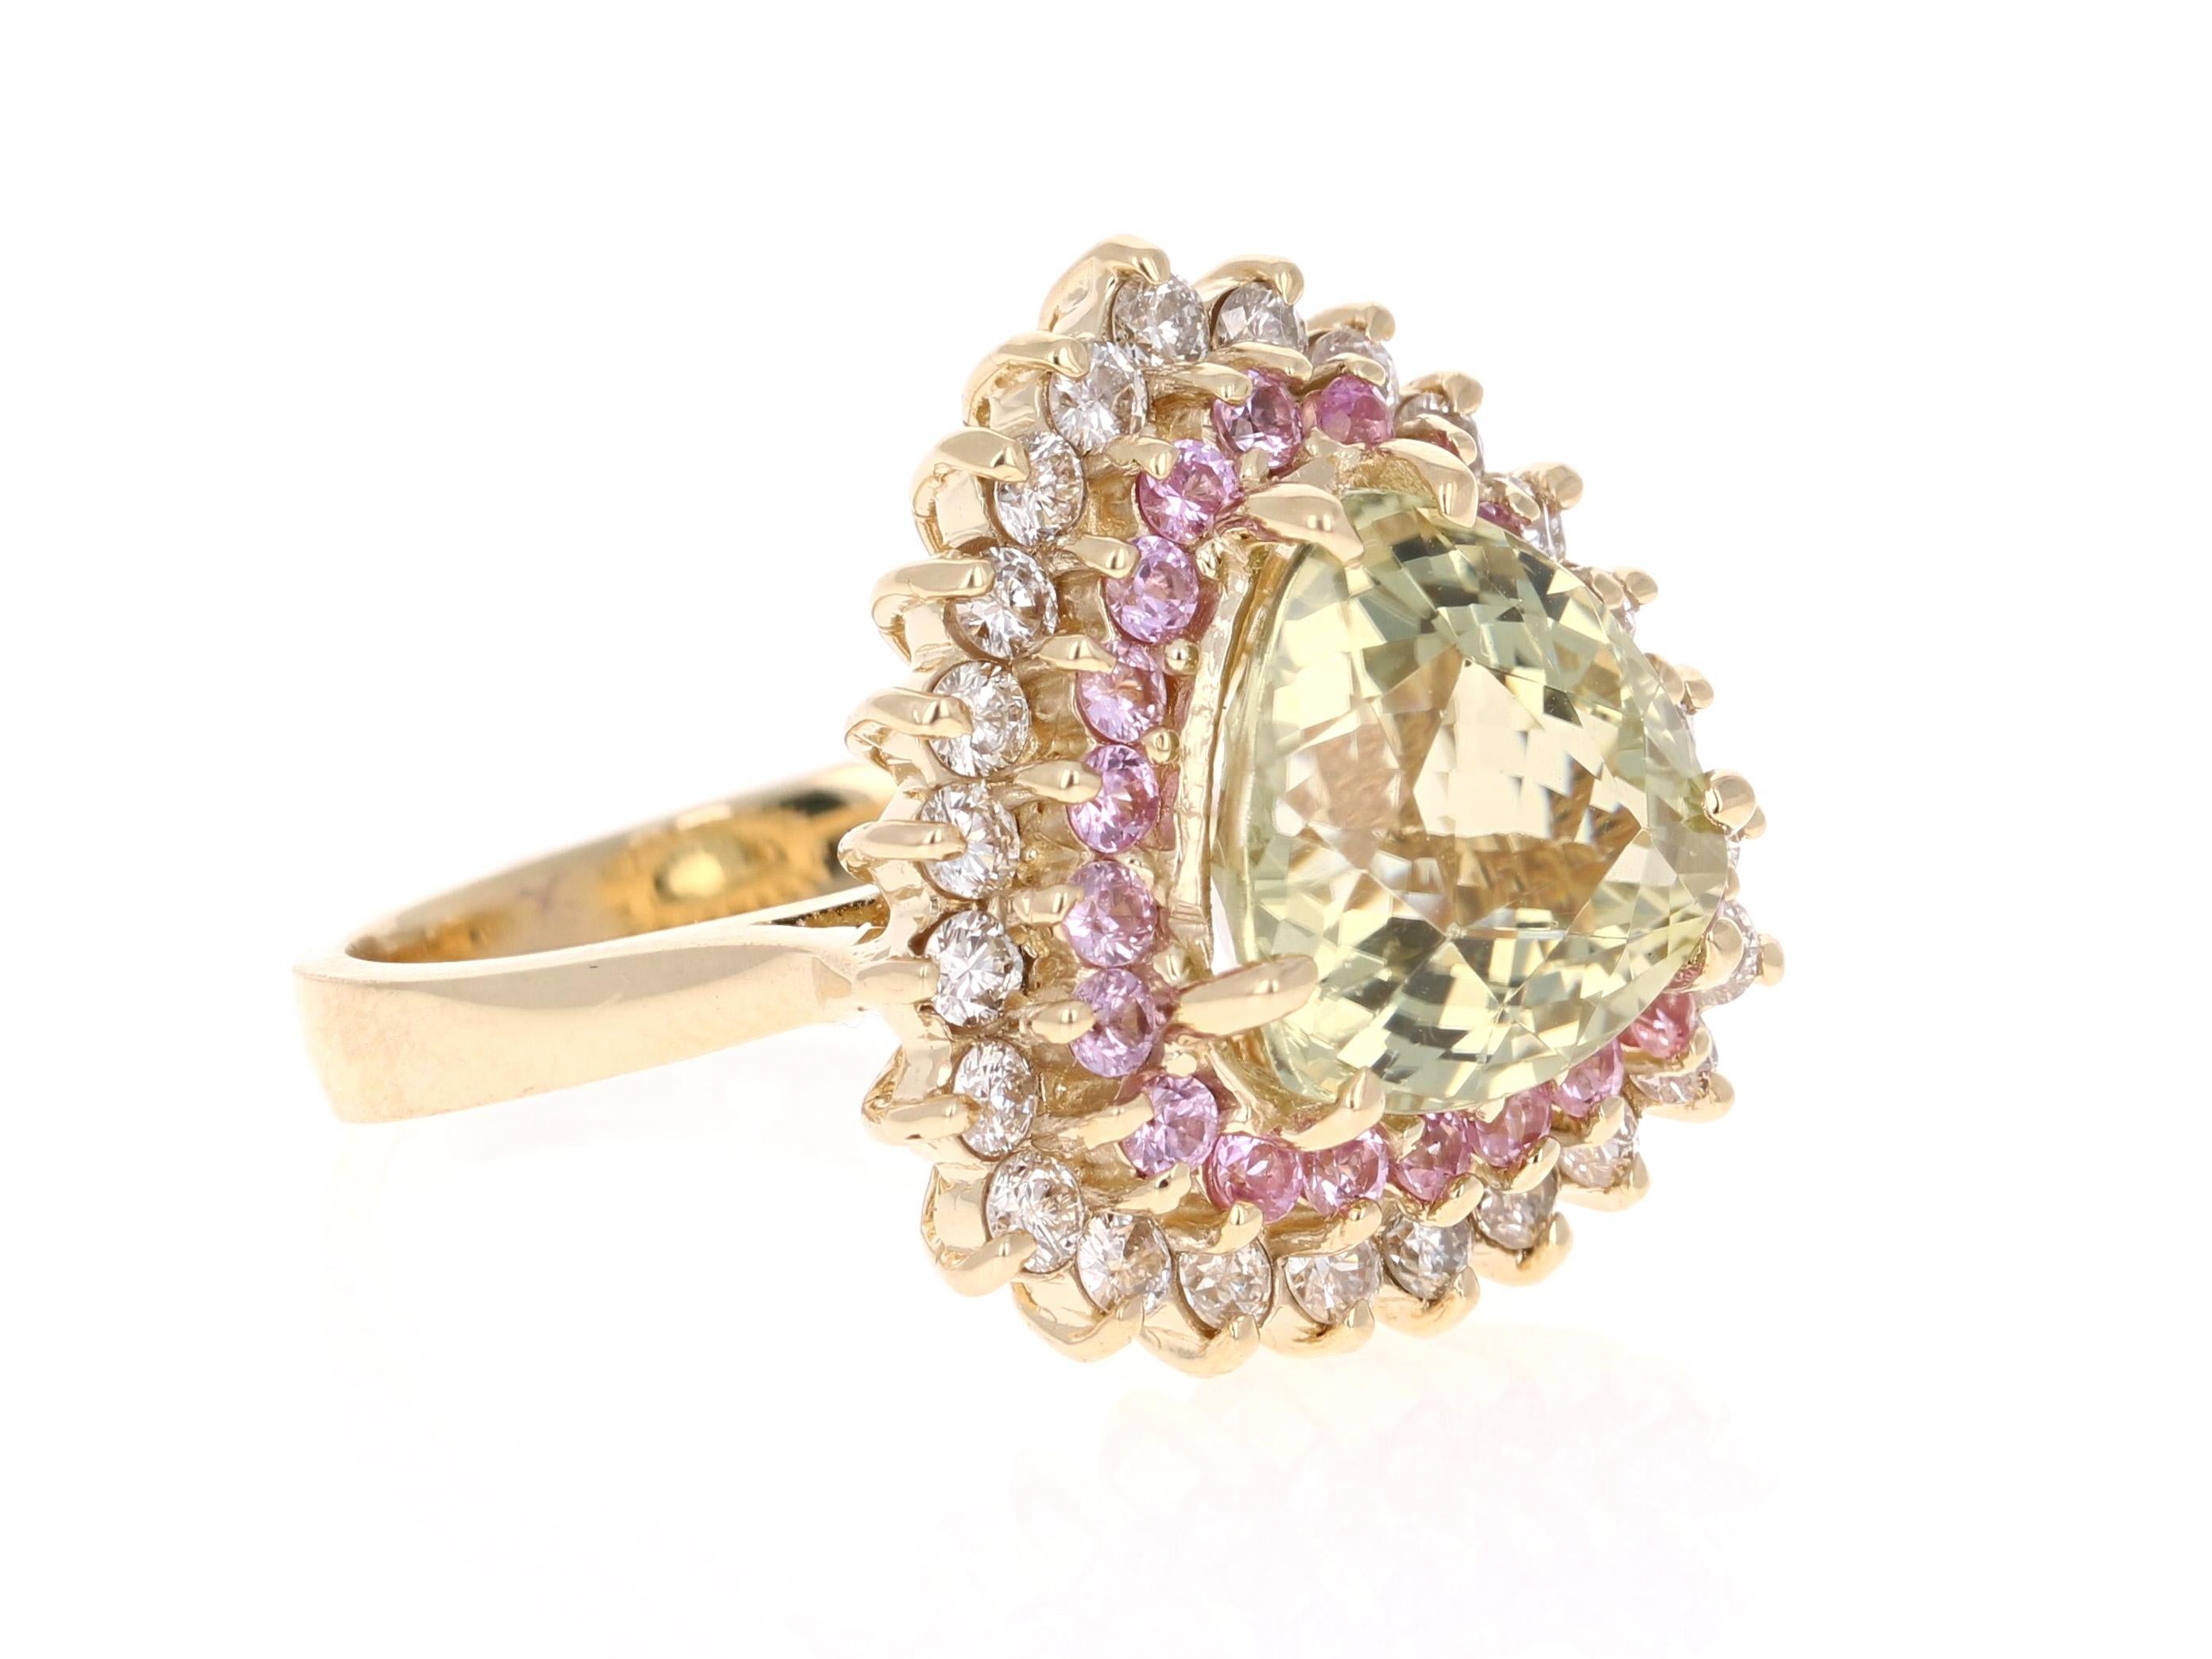 A uniquely designed piece that is sure to elevate your accessory wardrobe!  

This beauty has a Trillion Cut Light Green Tourmaline set in the center of the ring that weighs 5.01 carats.  It is surrounded by 21 Round Cut Pink Sapphires that weigh